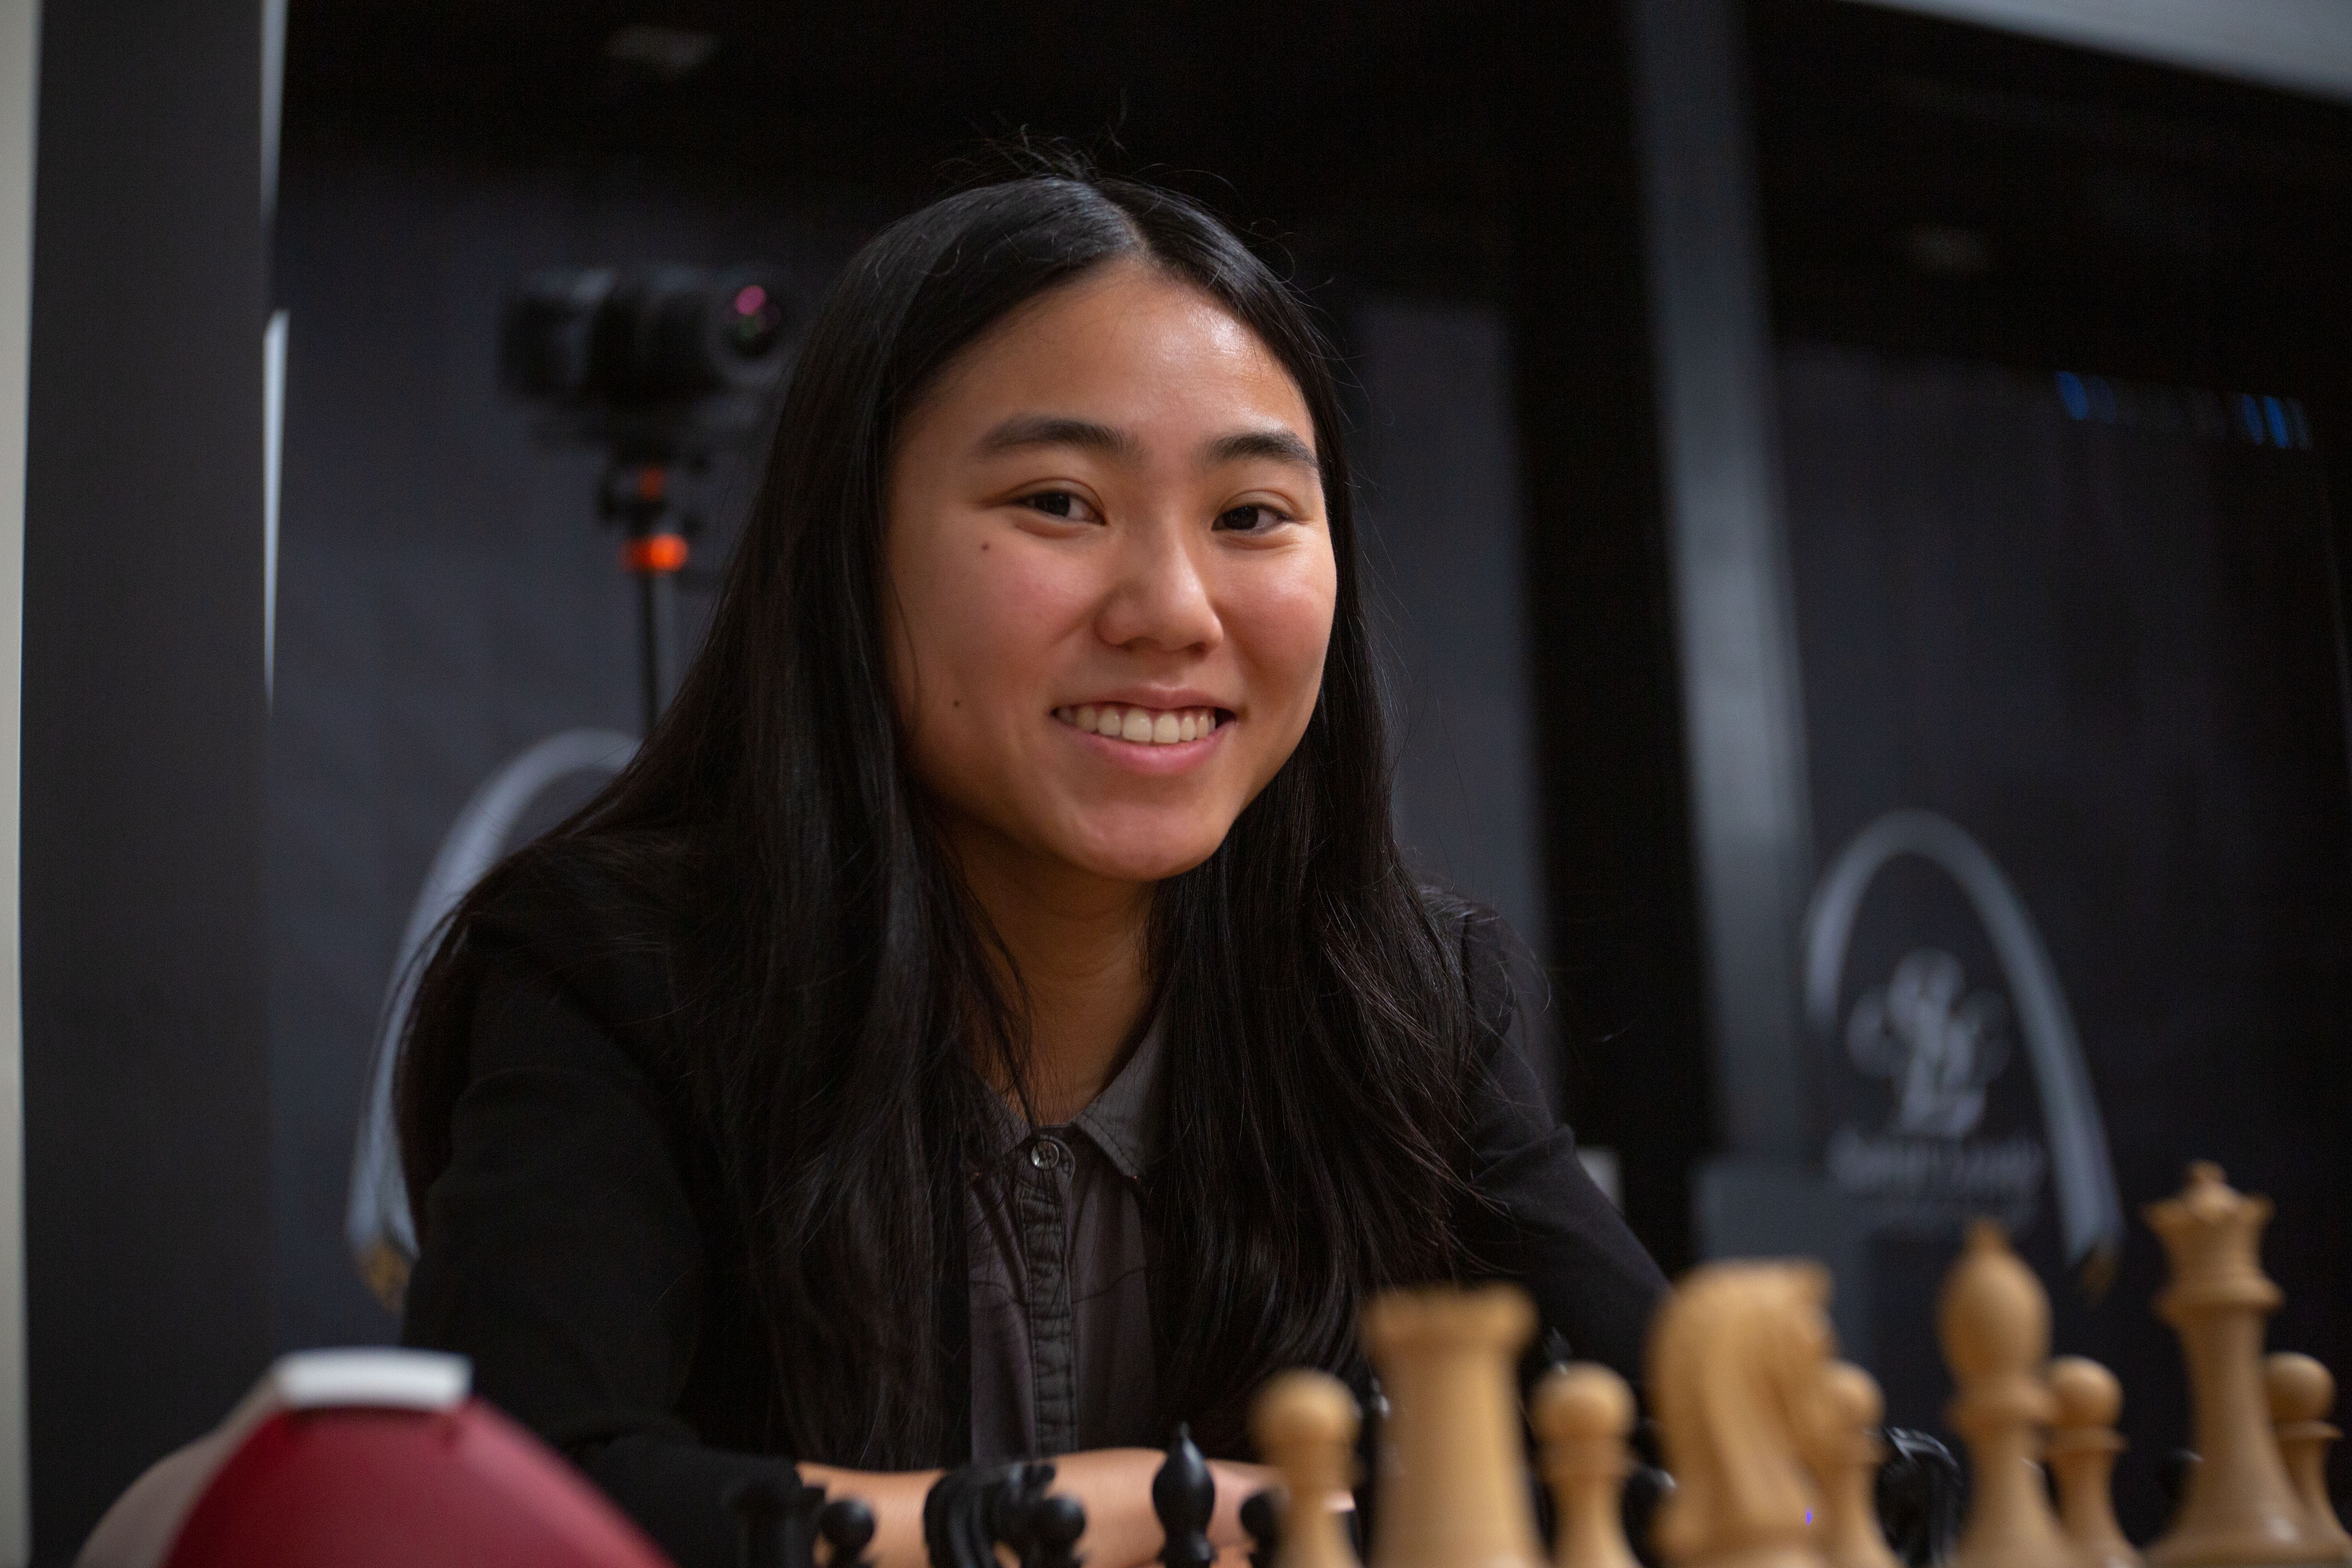 2022 U.S. Championships, Round 9: Yu Grabs Lead, Liang Channels